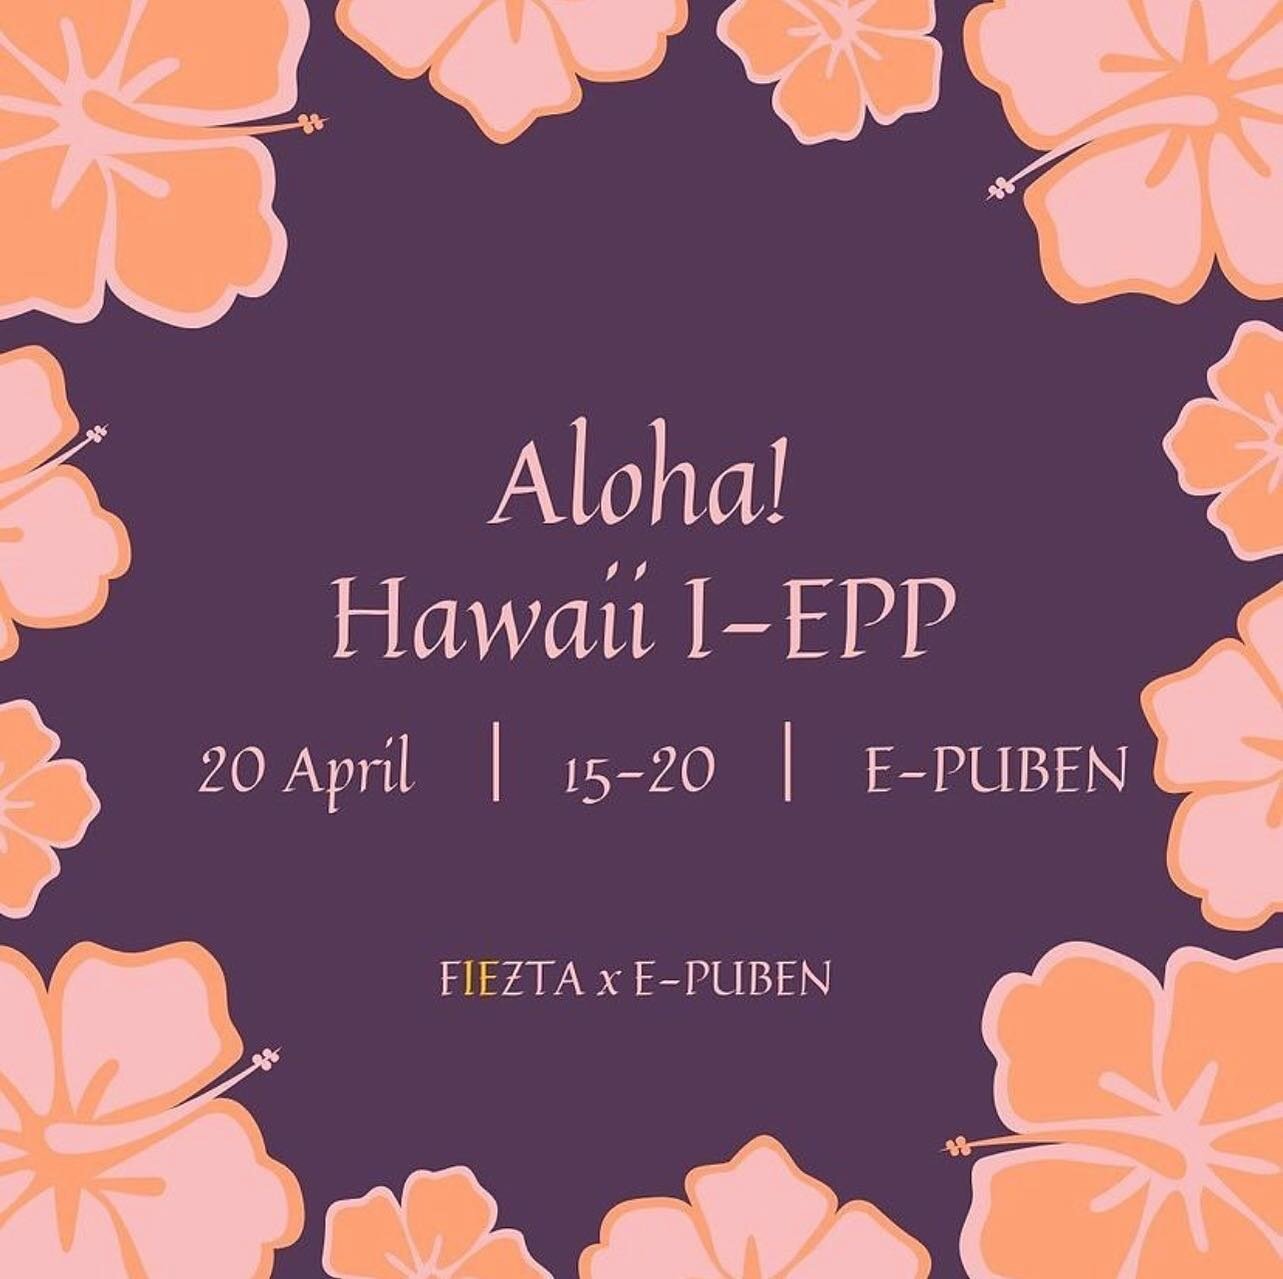 This wednesday 20/4 its time for another I-EPP! This time its Hawaii theme so put on your most colorful shirt, maybe sunglasses, maybe a flower in your hair🌸 there are also rumors of a quiz of some sort&hellip;👀 
See you on wednesday, get excited c